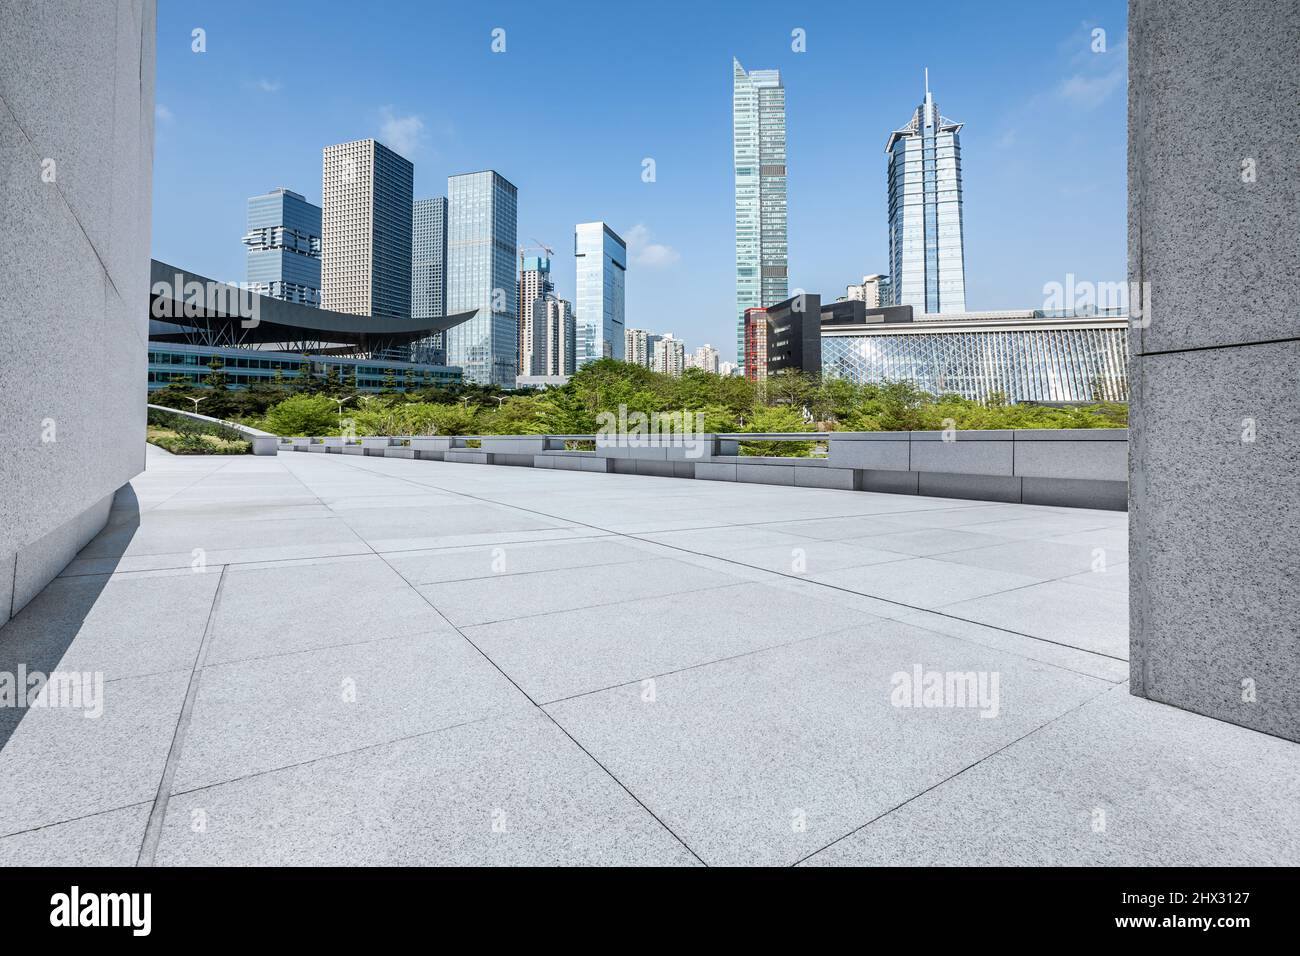 Modern city skyline and commercial buildings with empty floors in Shenzhen, China. Stock Photo